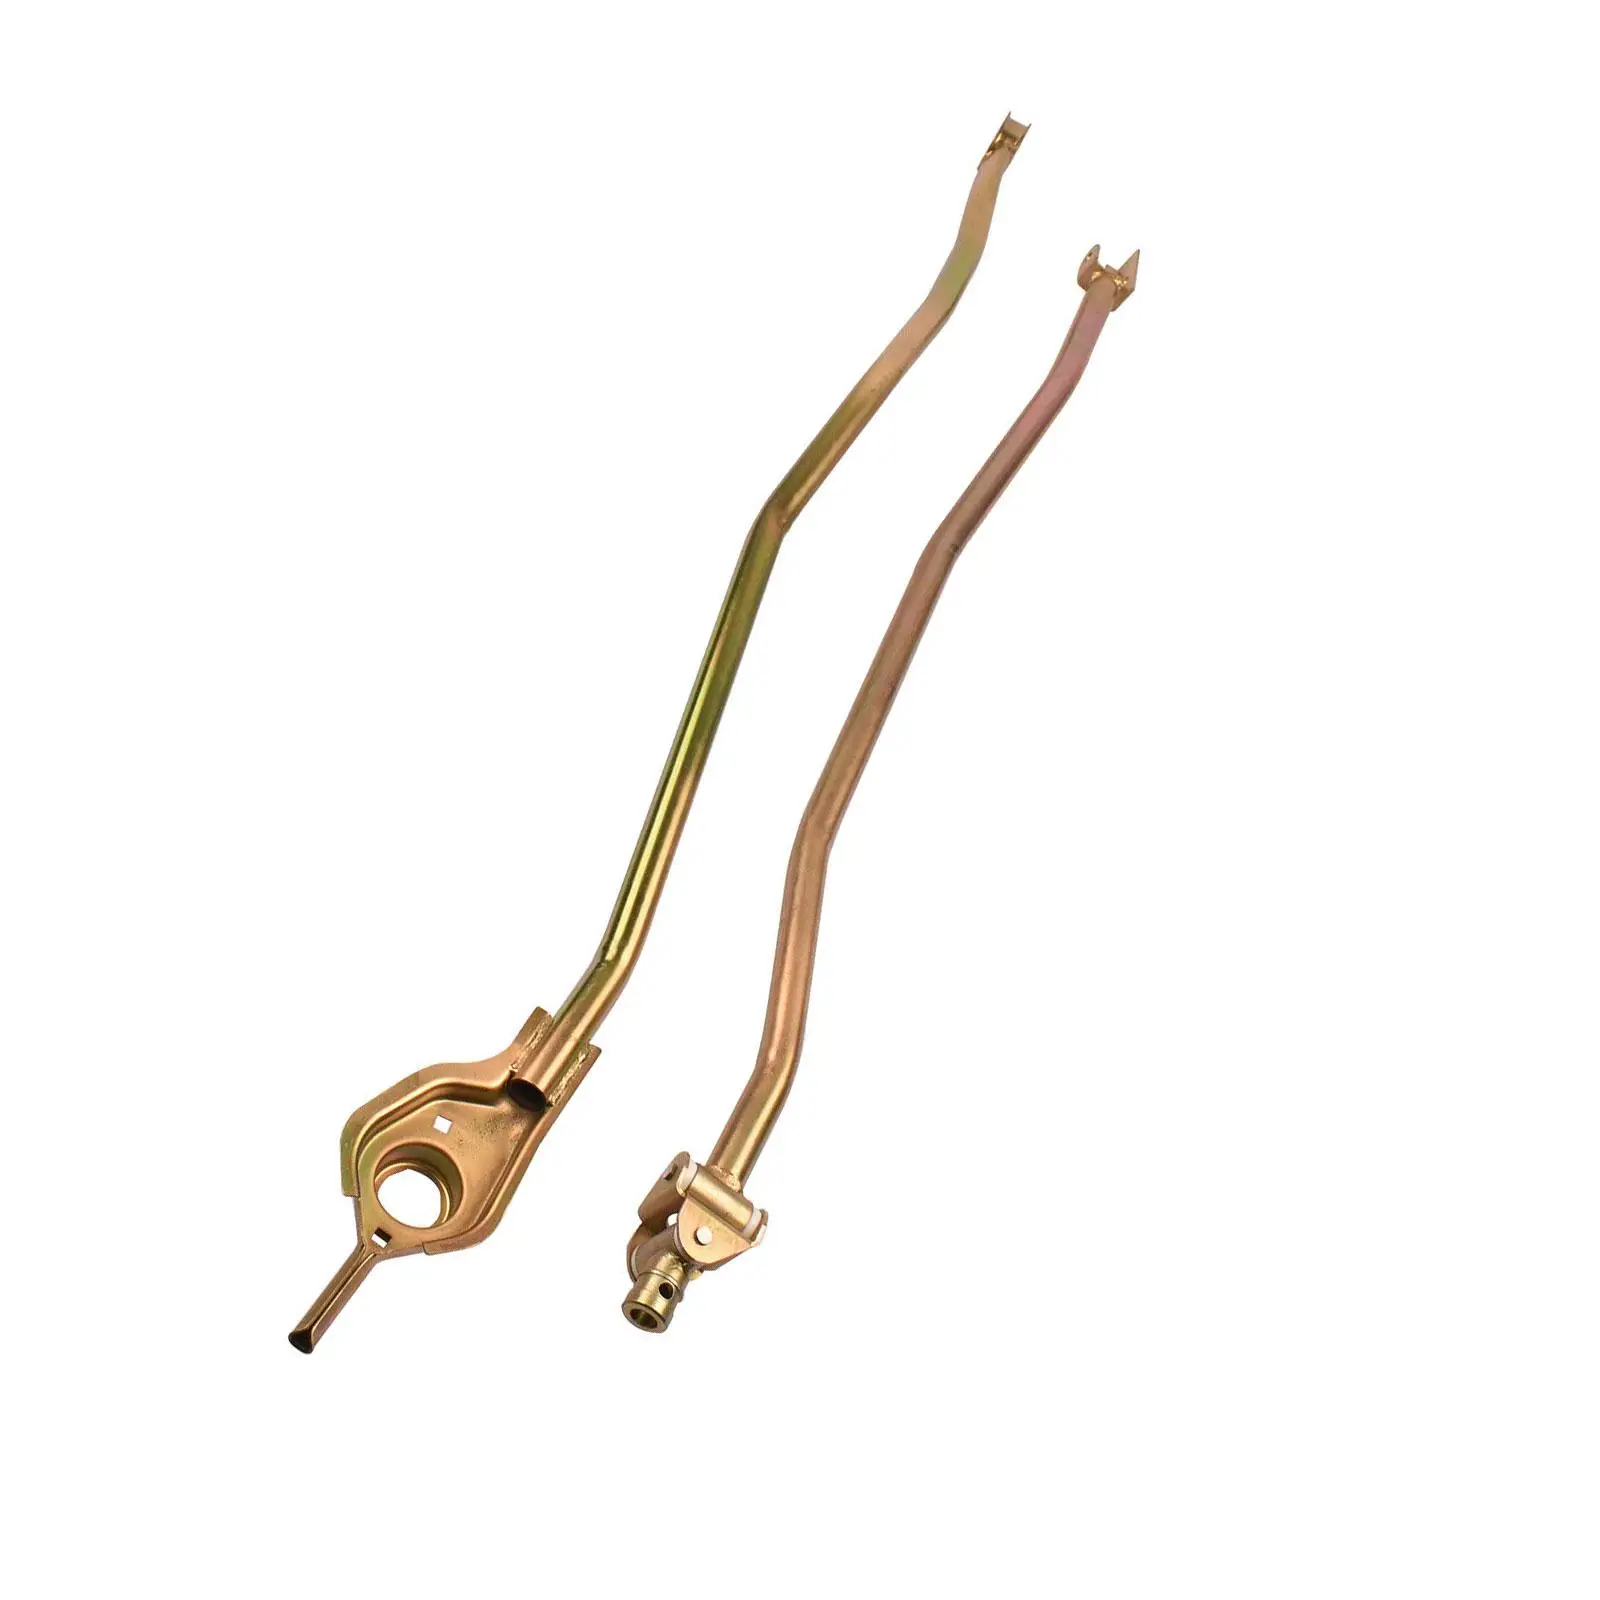 Shift Linkage Egblink for Honda Civic B Series Swap 1992-2000 Easy Installation Replaces Spare Parts